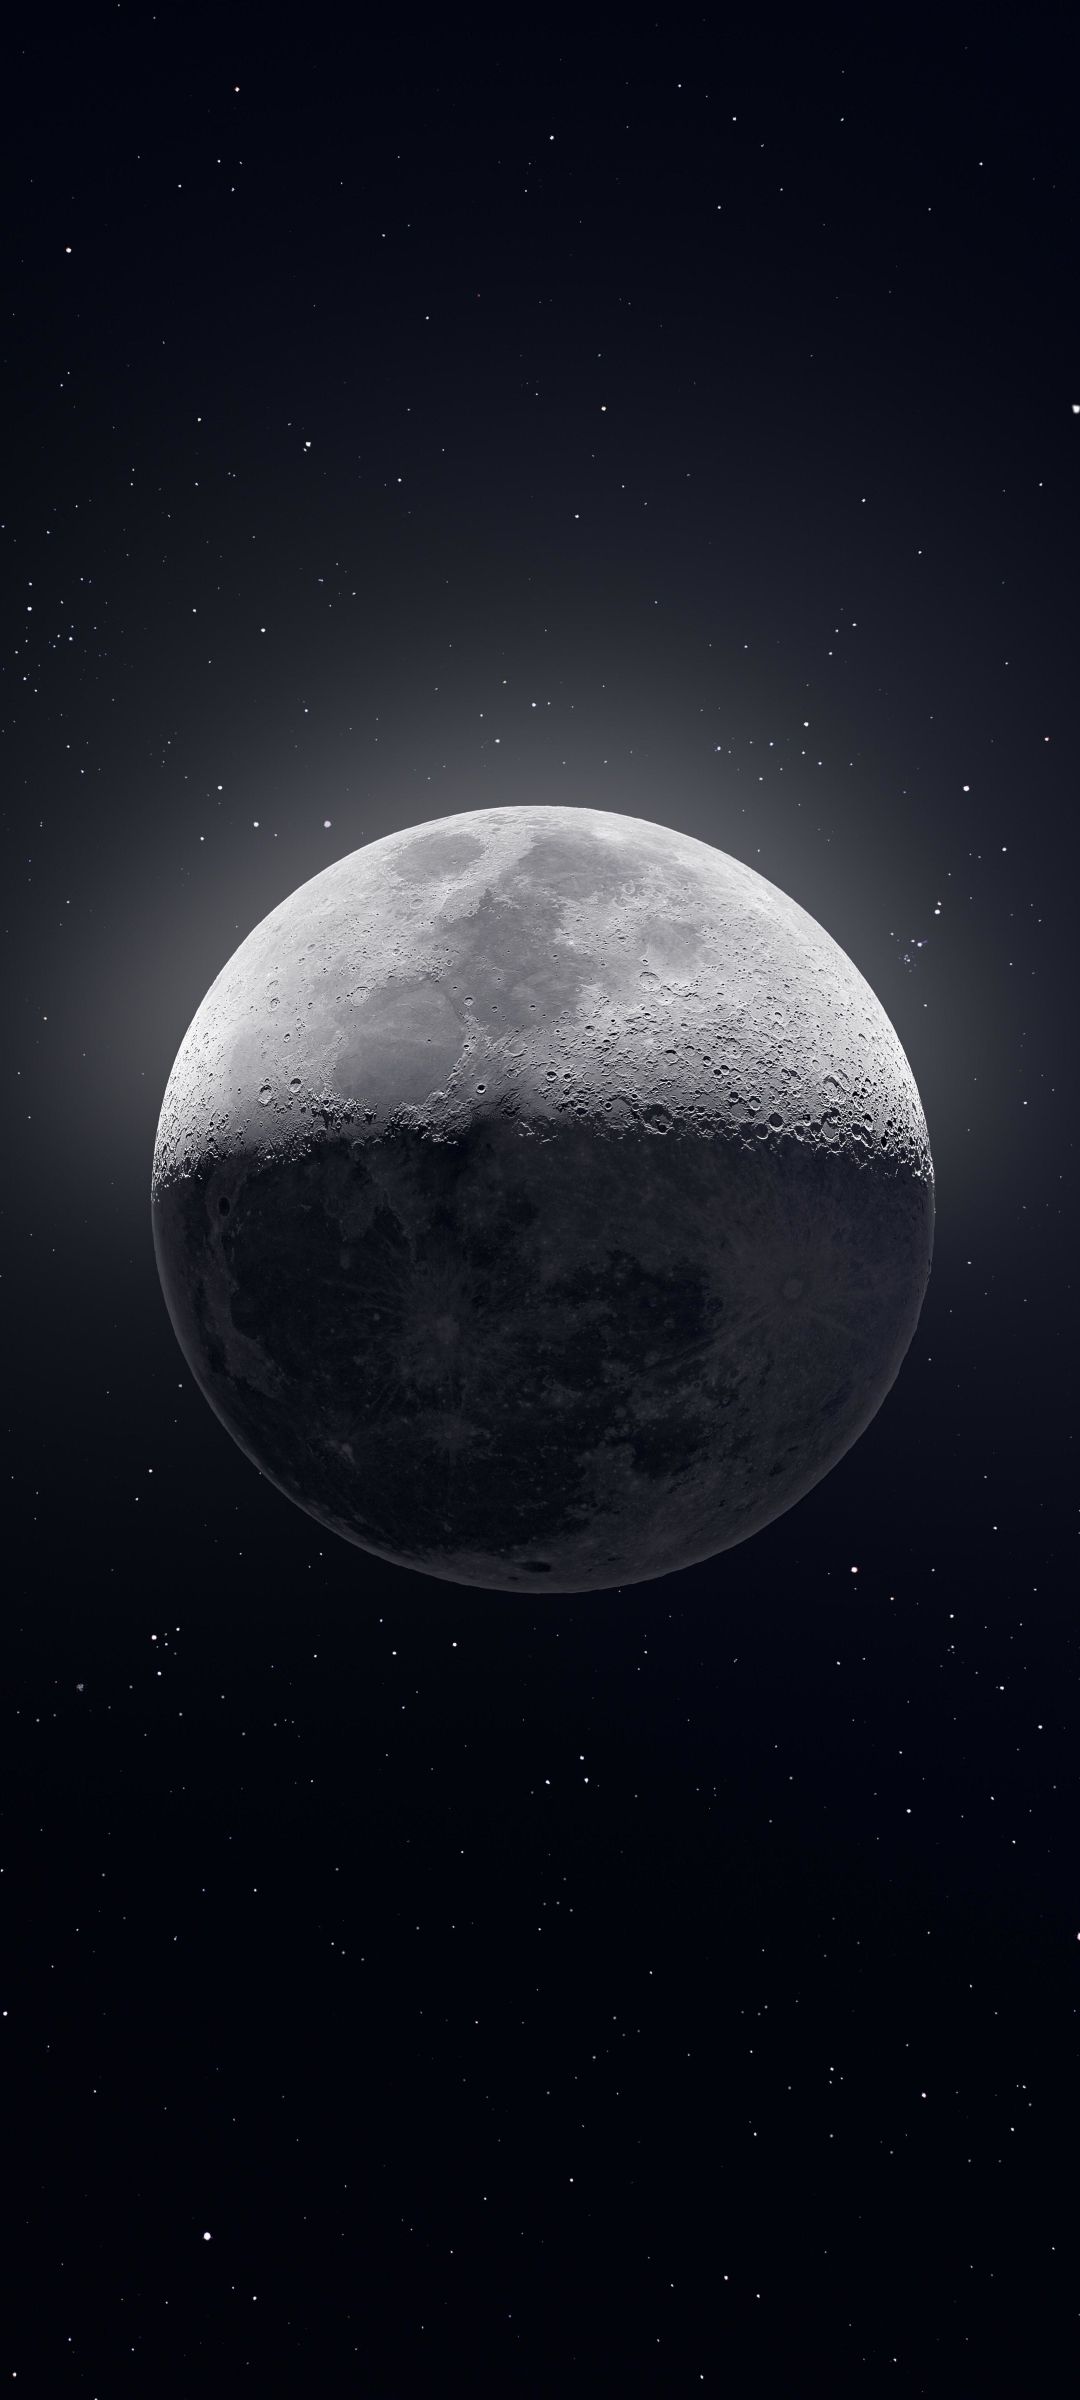 IPhone wallpaper of the moon in space - 1080x2400